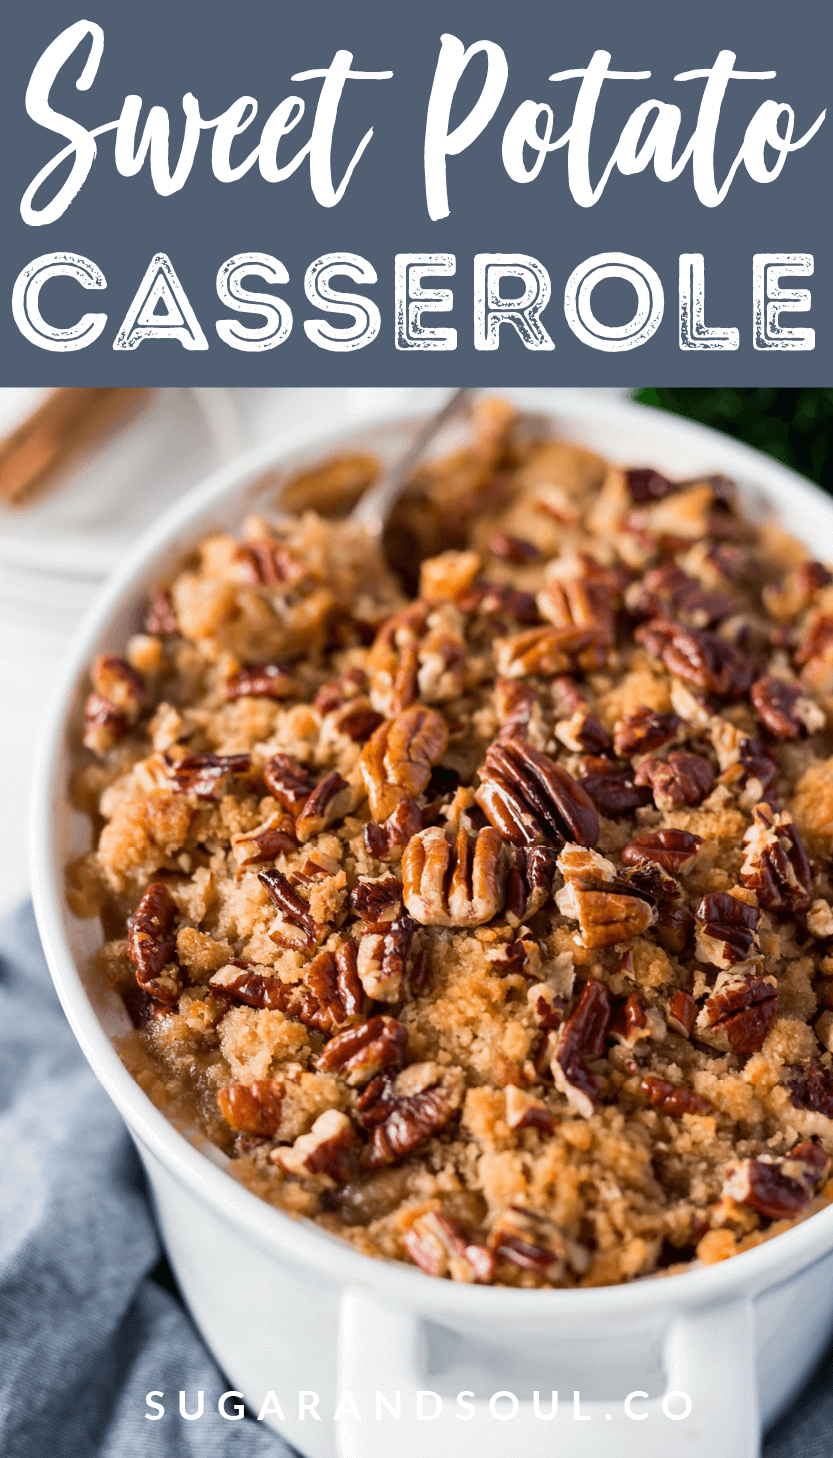 This Sweet Potato Casserole is loaded with rich and cozy flavors of brown sugar, cinnamon, and nutmeg. It's laced with butter and crunchy pecans, the perfect holiday side dish!